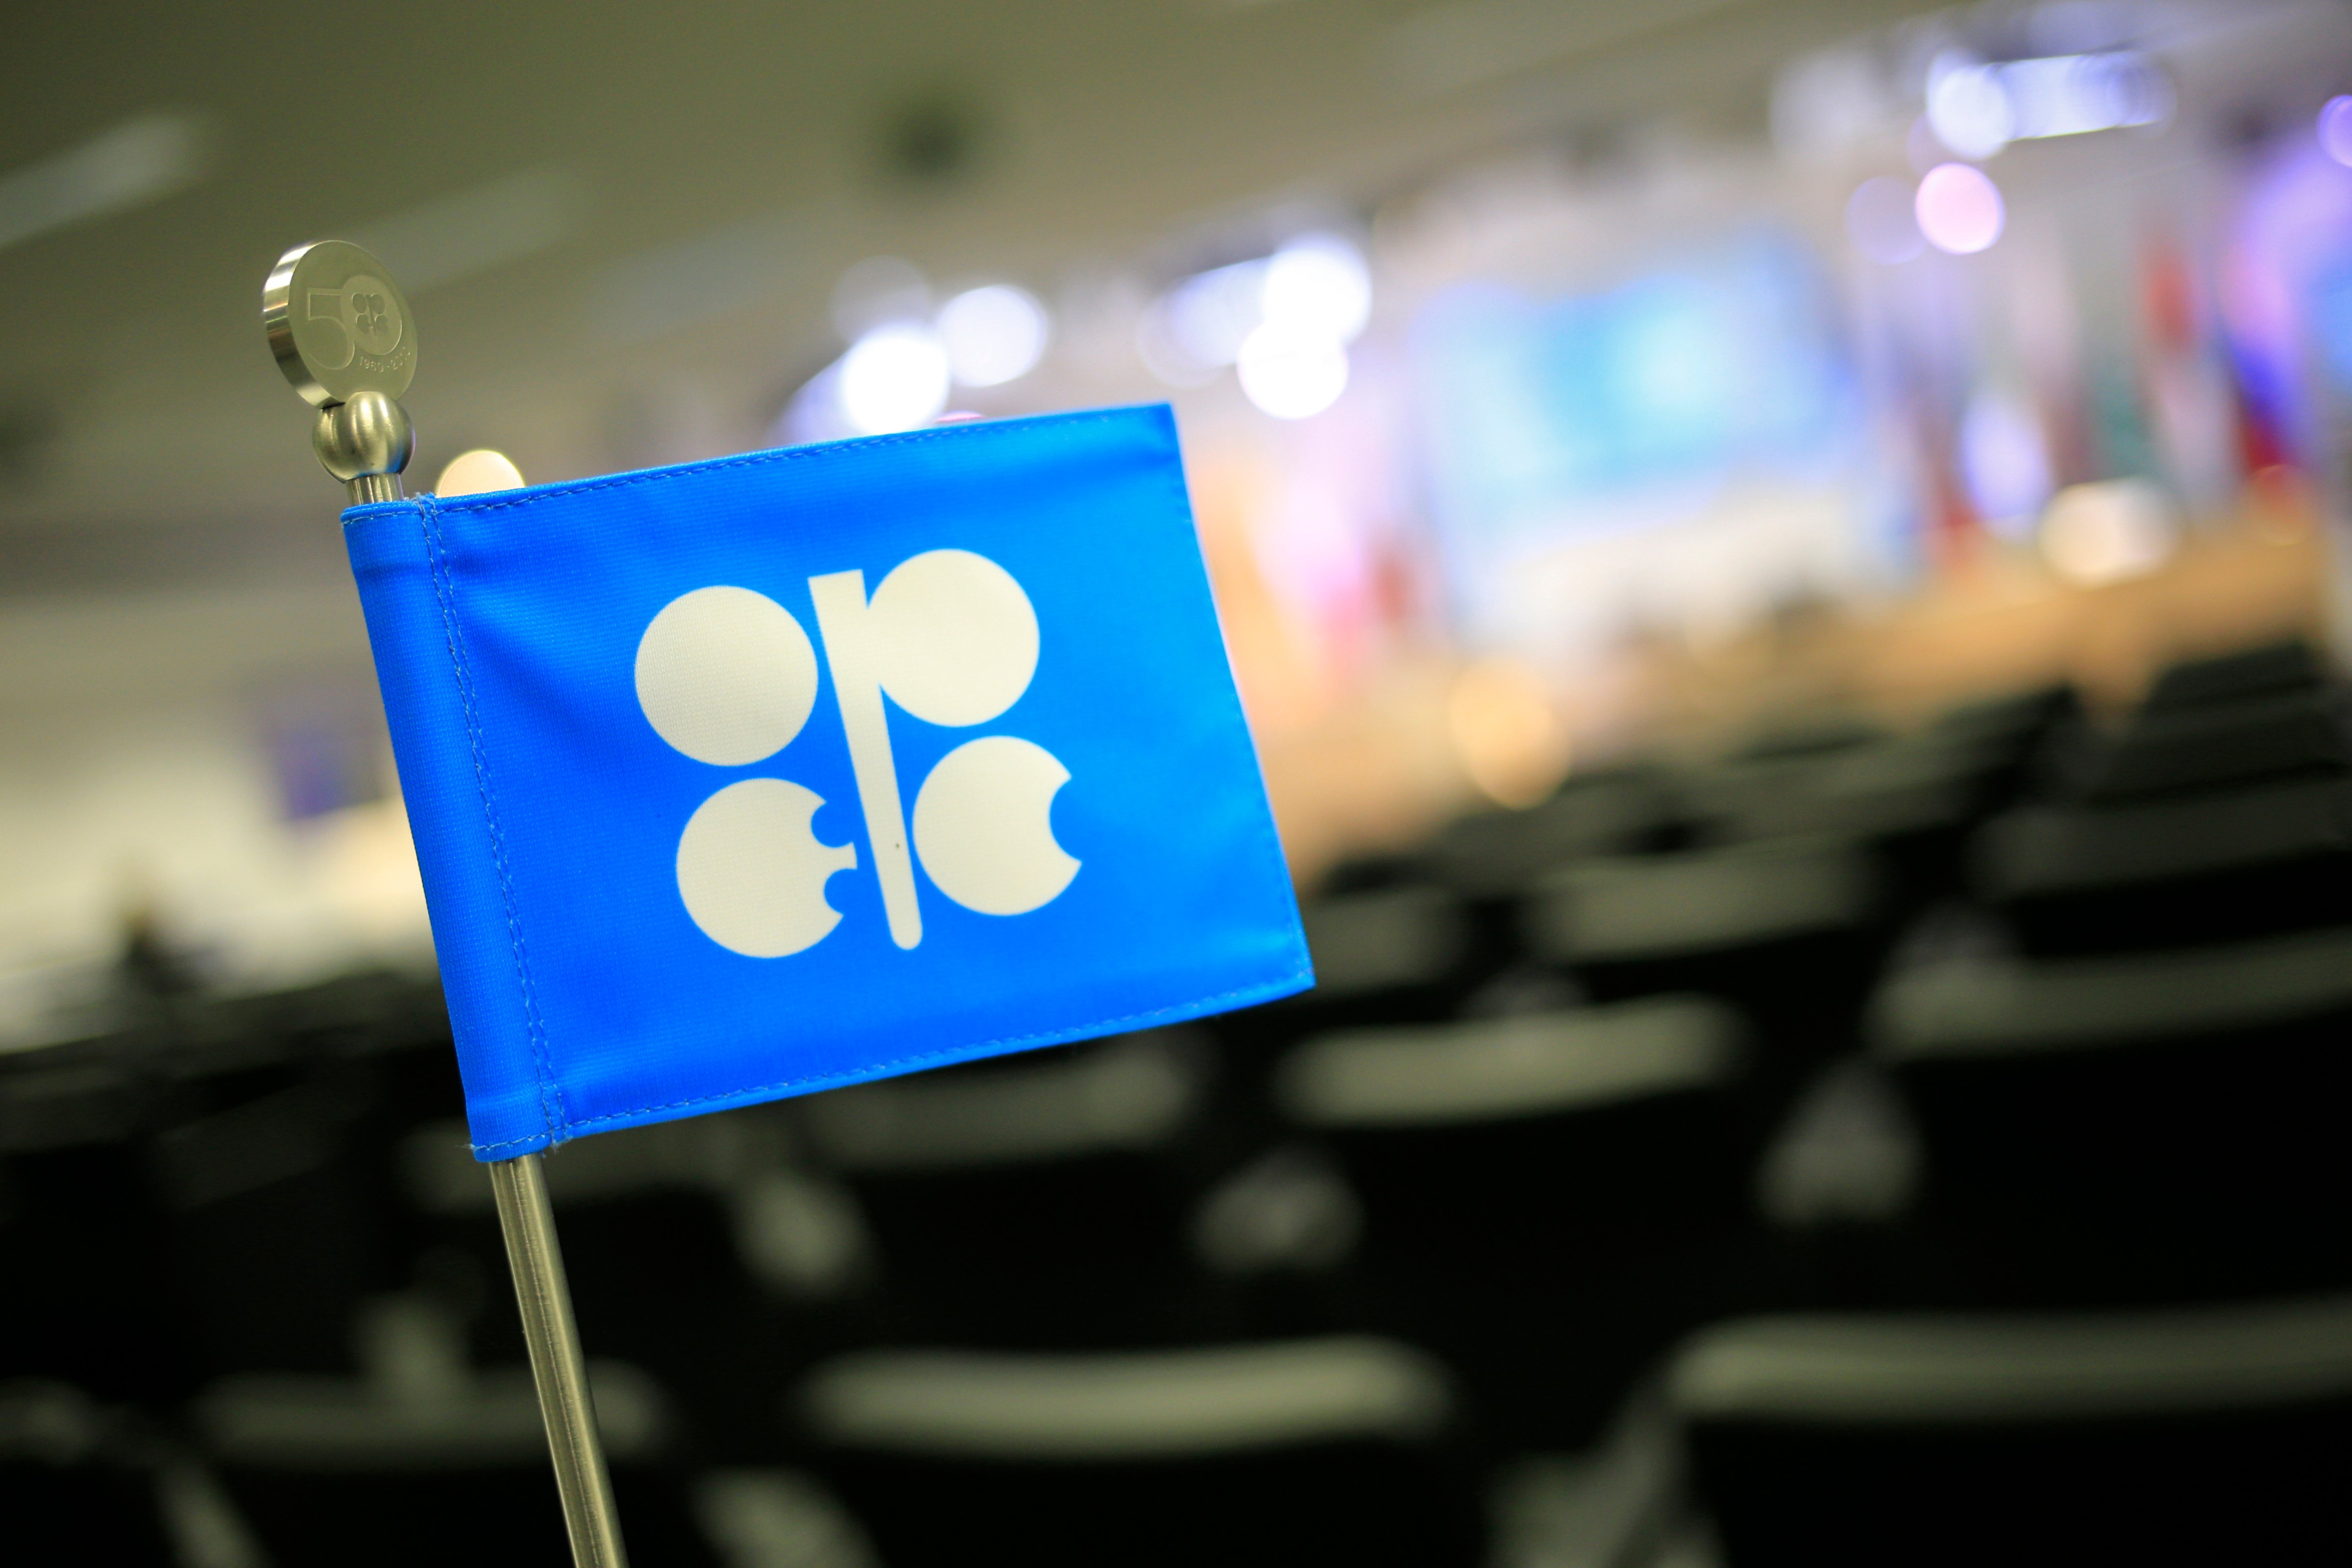 The OPEC (Organization of the Petroleum Exporting Countries) flag at the 164th OPEC meeting in Vienna on Dec. 3, 2013.